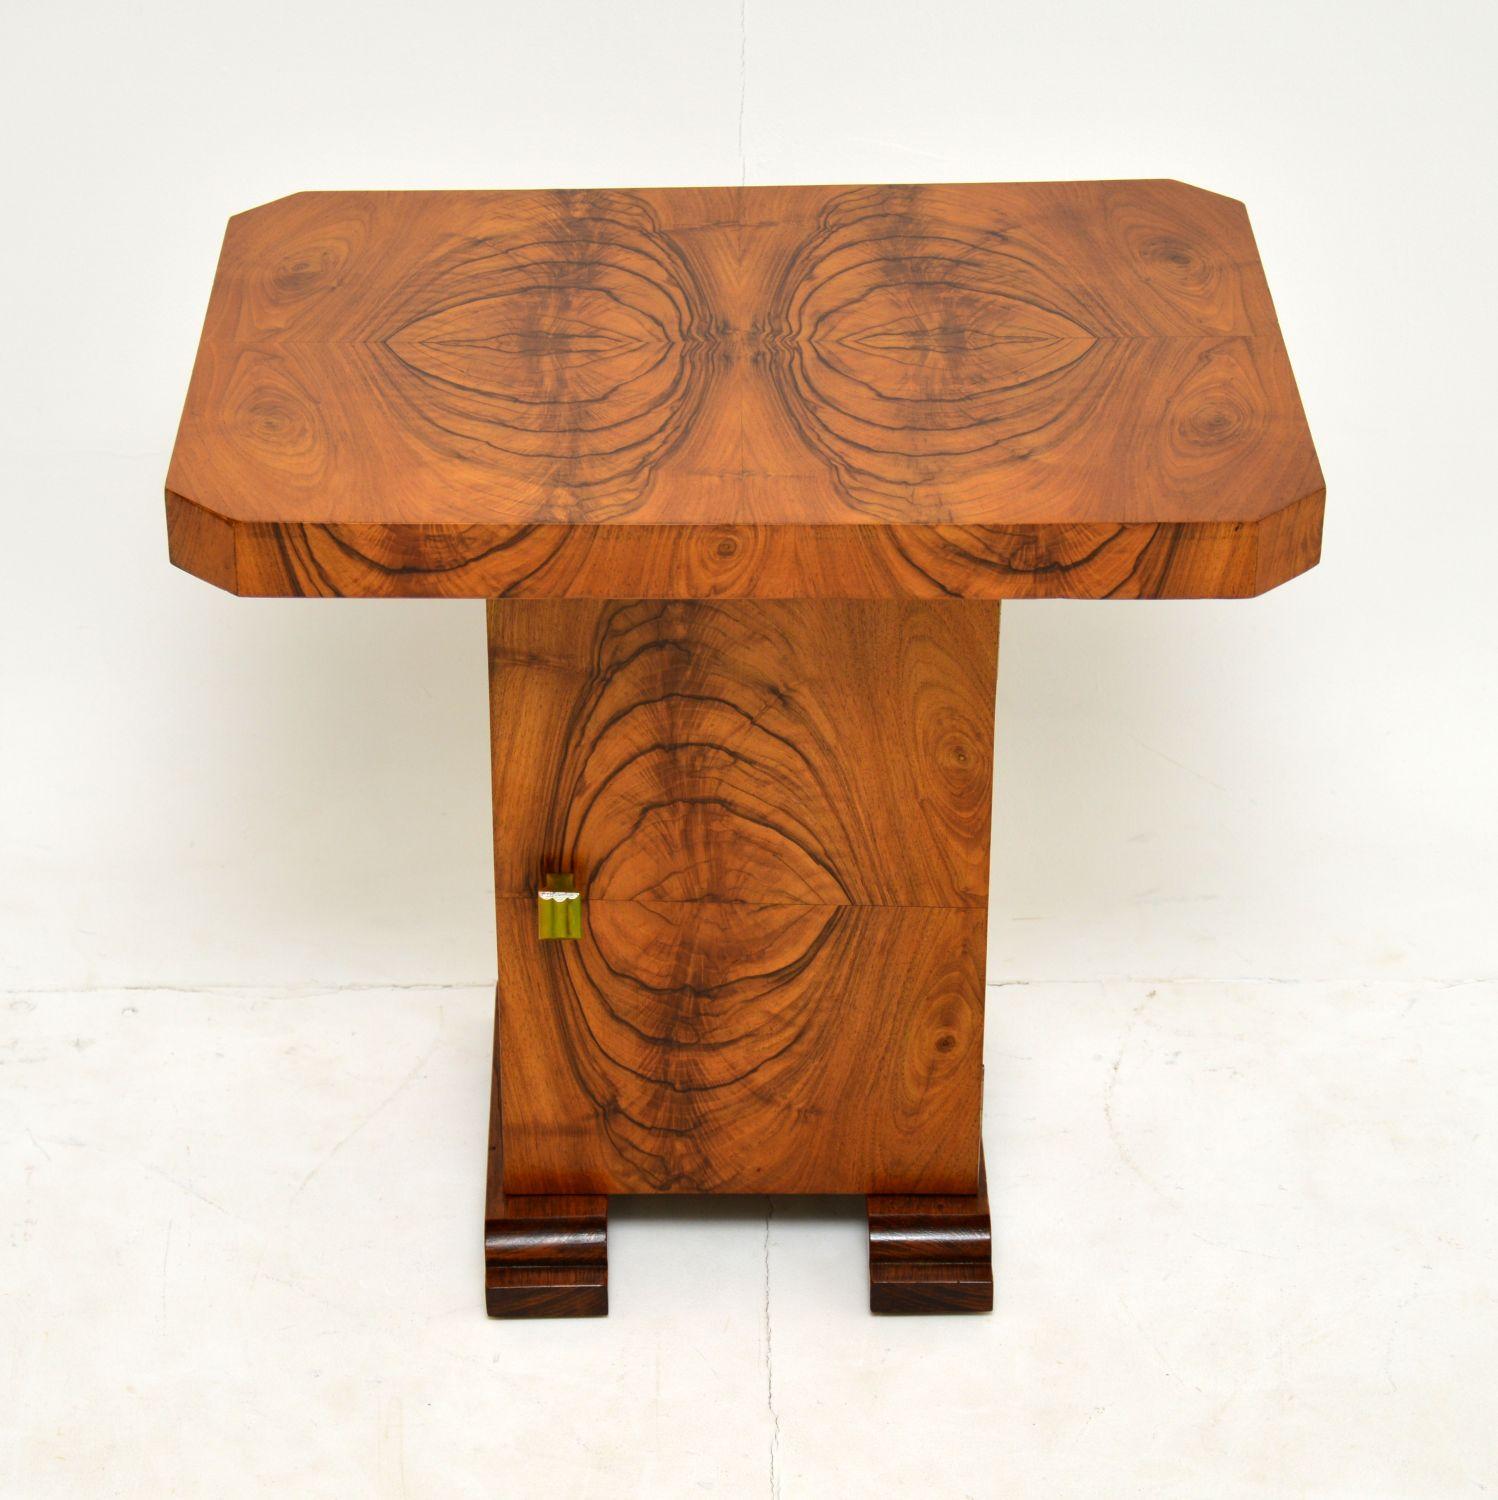 A stunning original vintage Art Deco period side table, made from incredibly beautiful figured walnut. This was made in England, it dates from the 1930’s.

This has some of the most striking walnut grain patterns we have ever seen. It is a useful